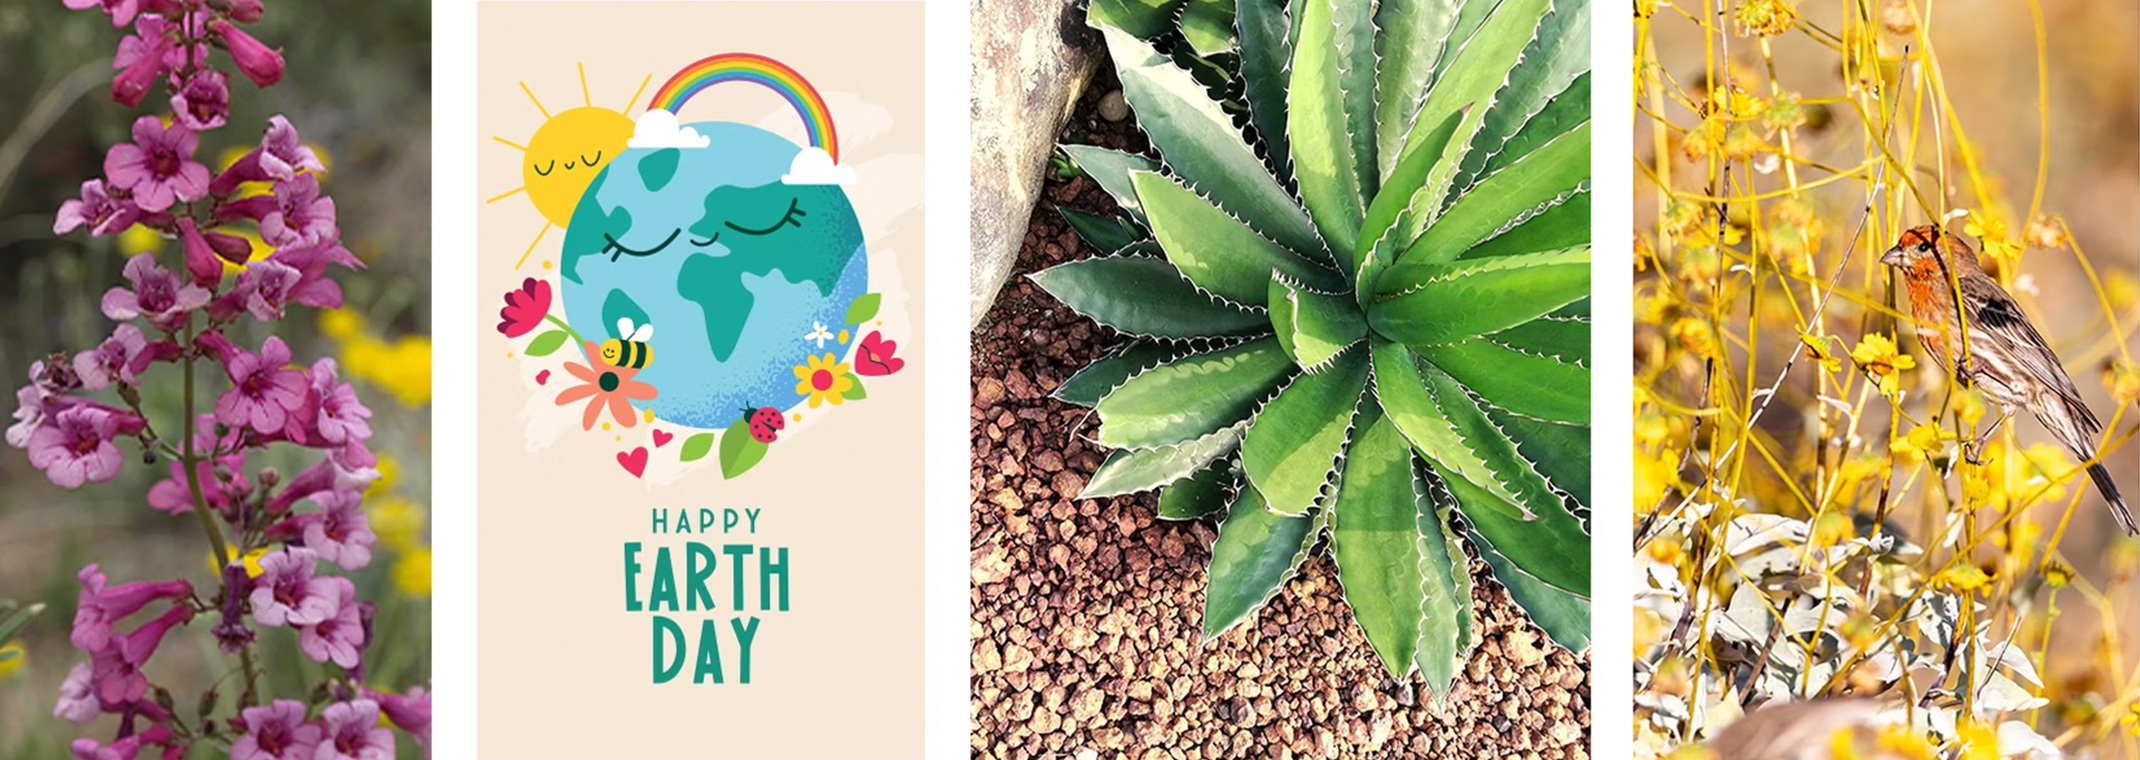 Parry's Penstemon, Happy Earth Day drawing, Agaves with rocks, and Brittle Bush with Bird.